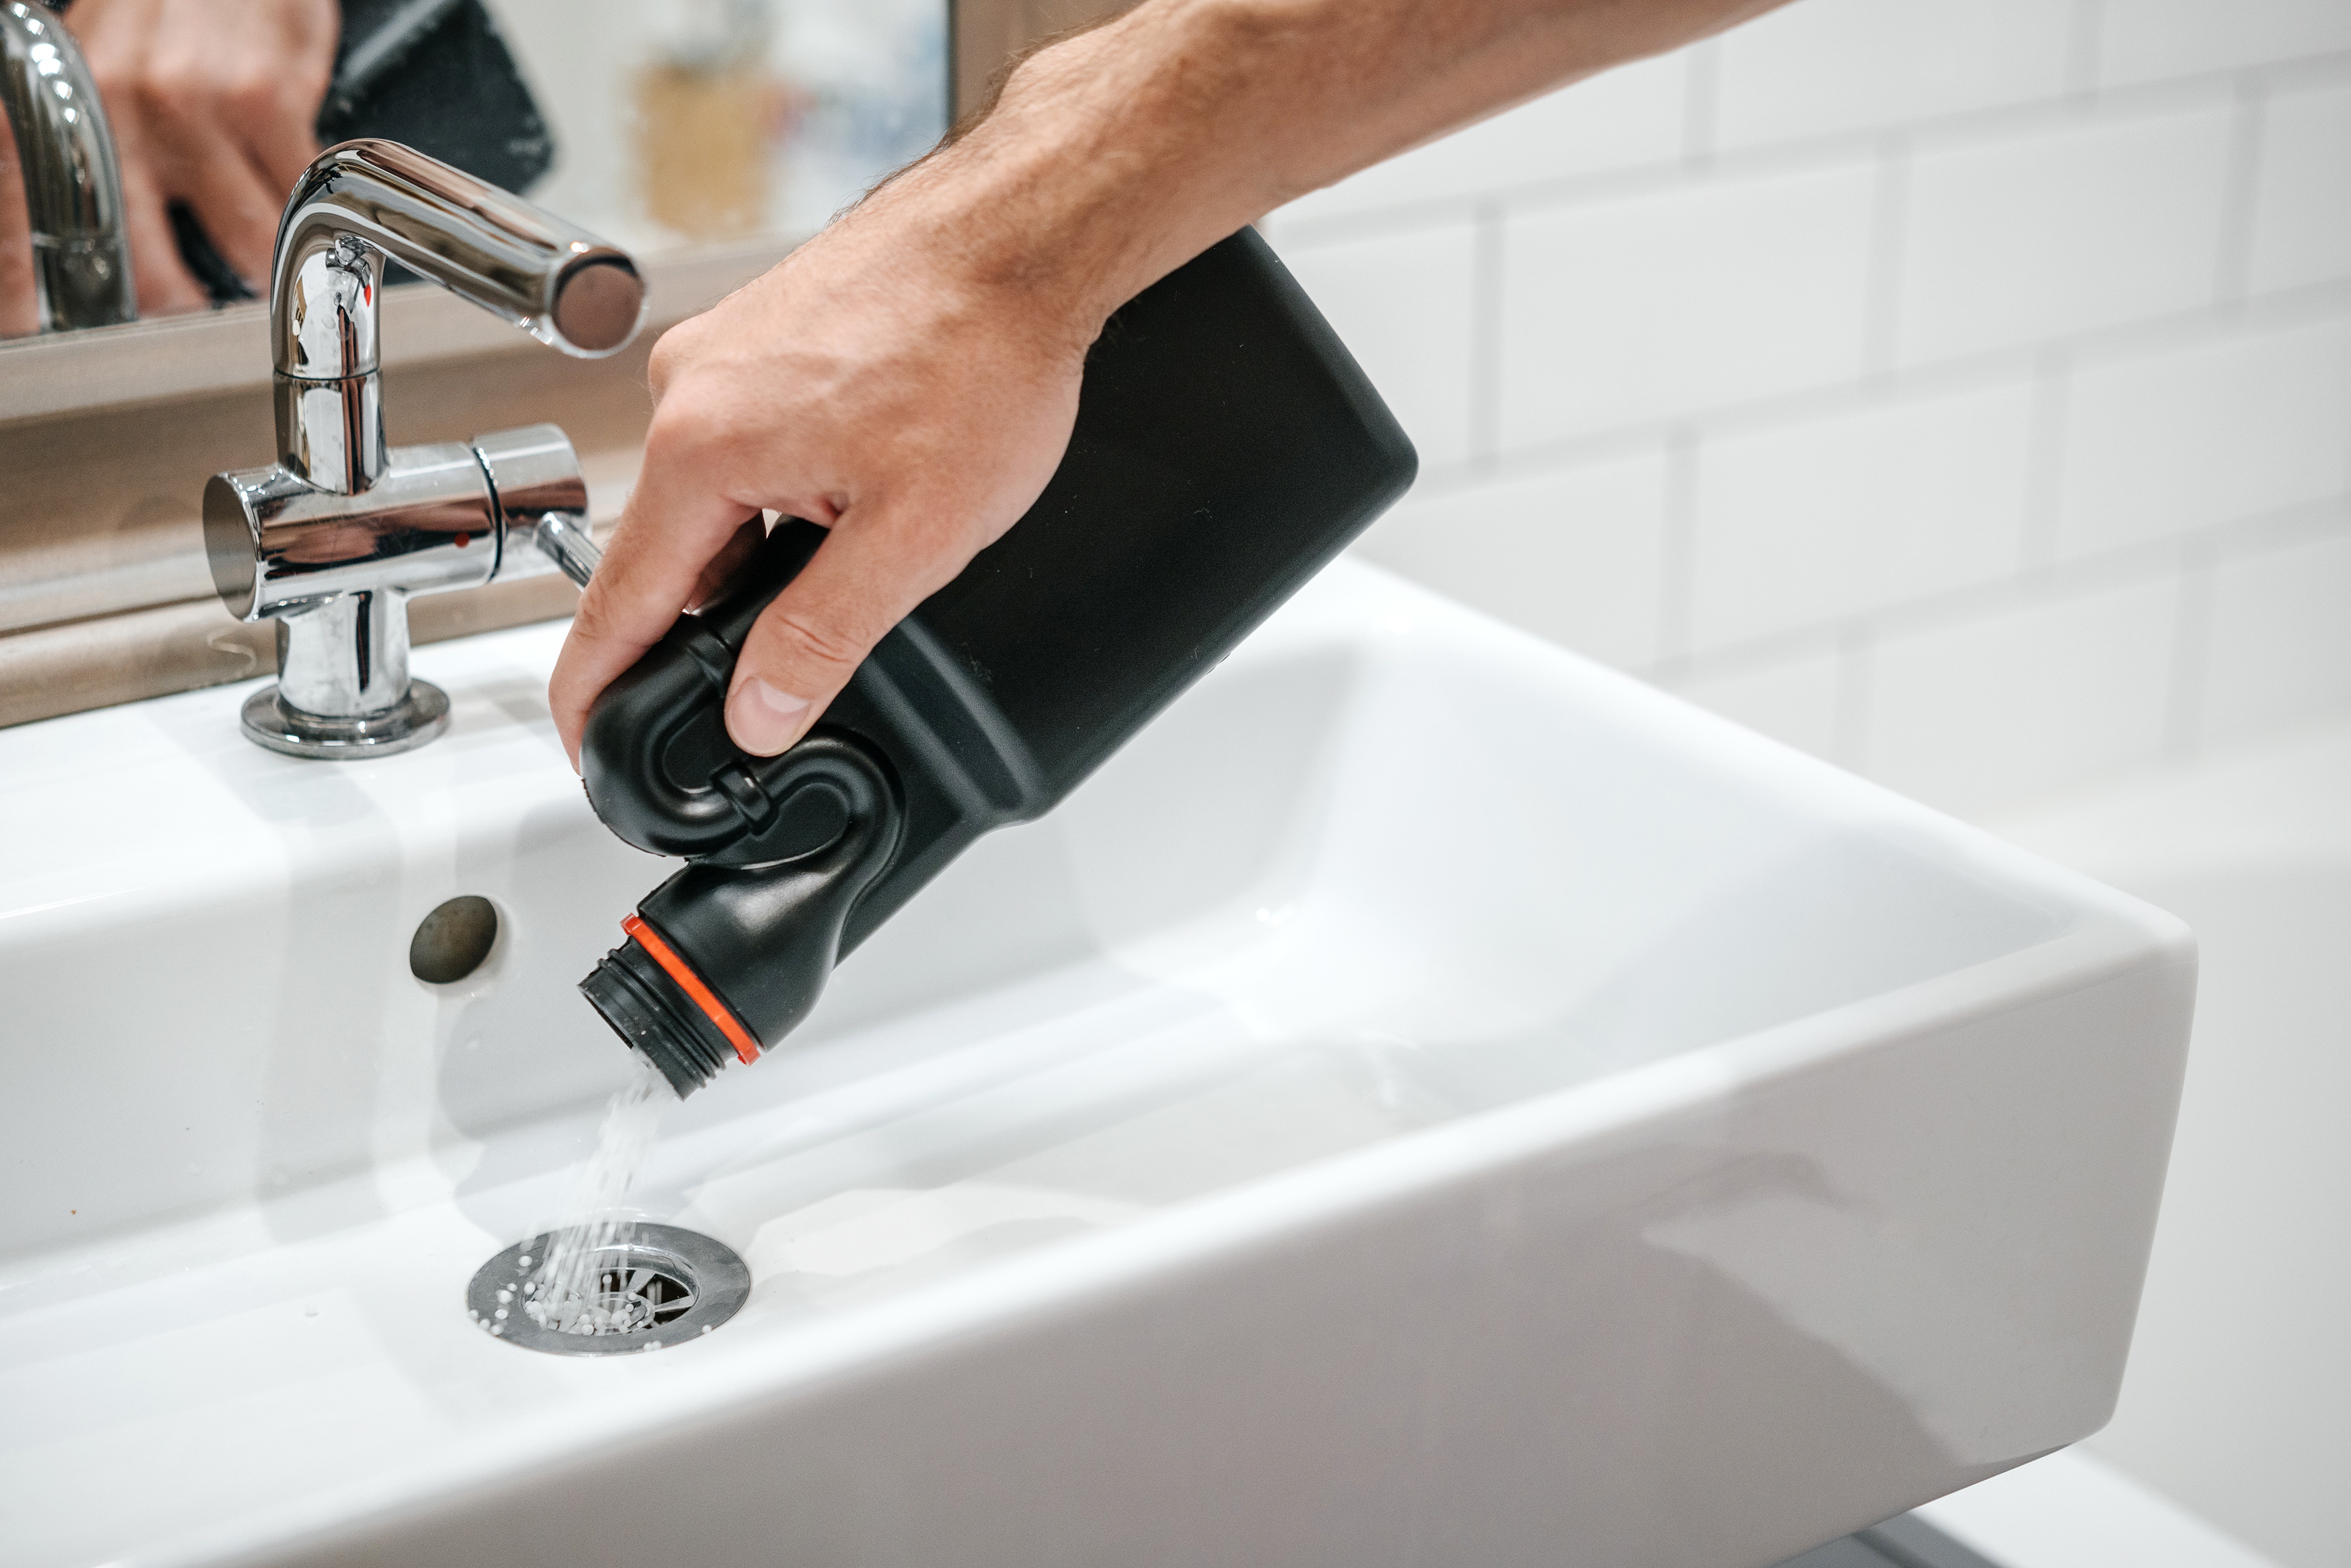 5 Main Reasons Why You Have Clogged Drains